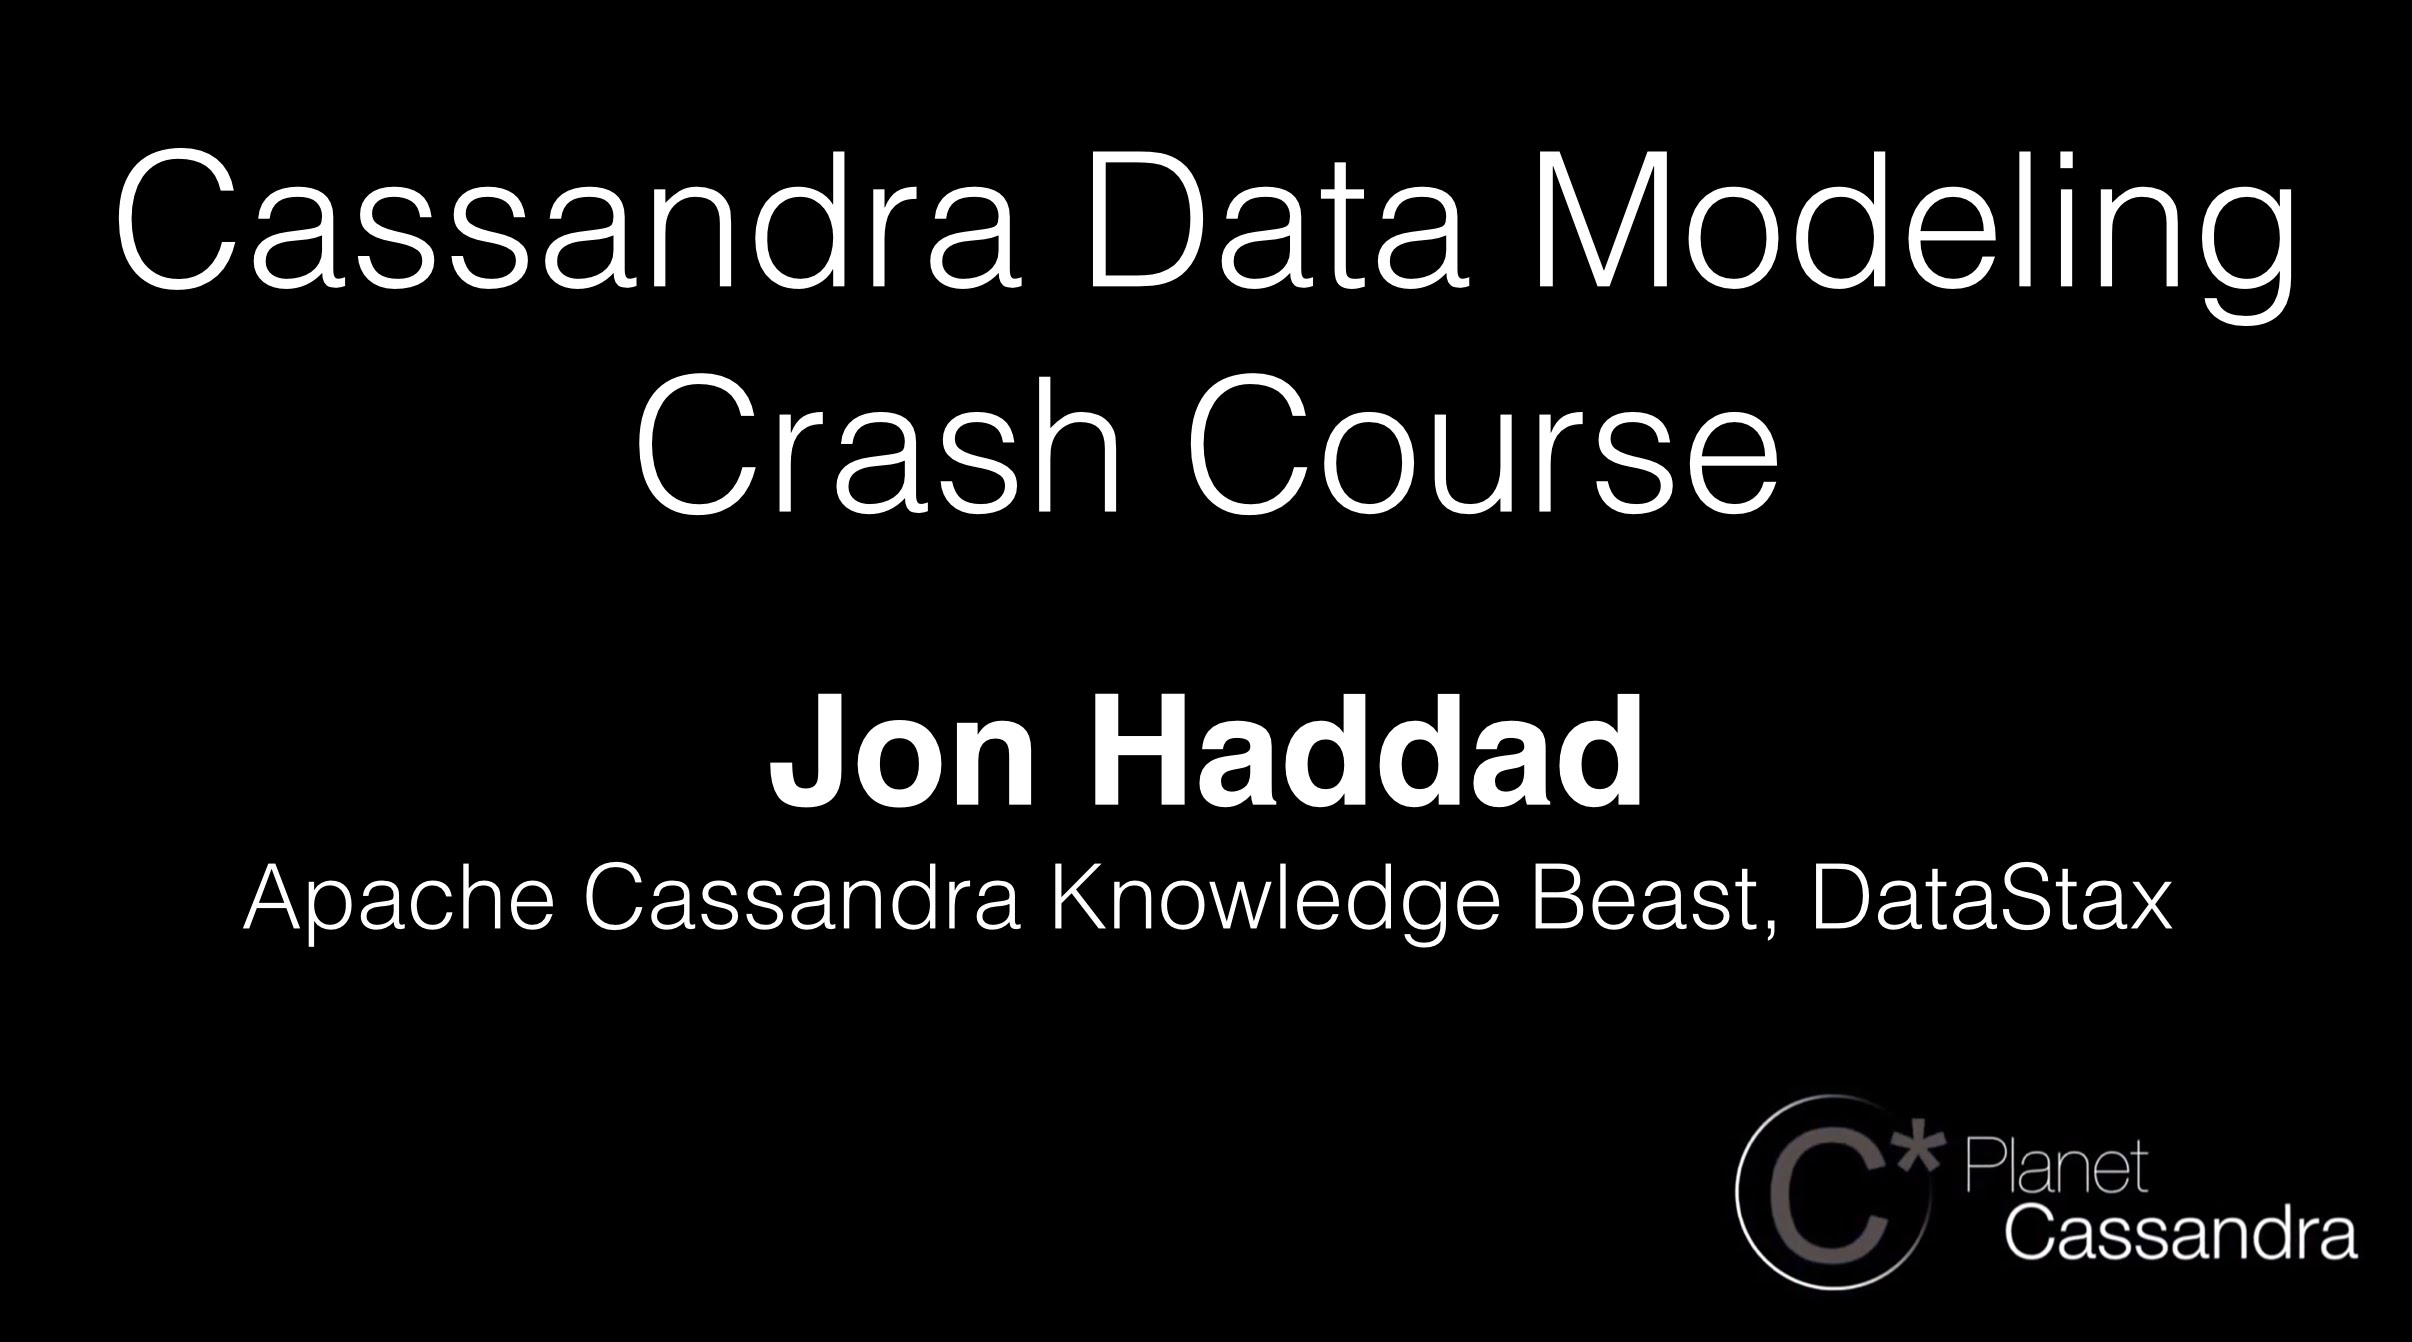 Introduction to Cassandra Data Modeling